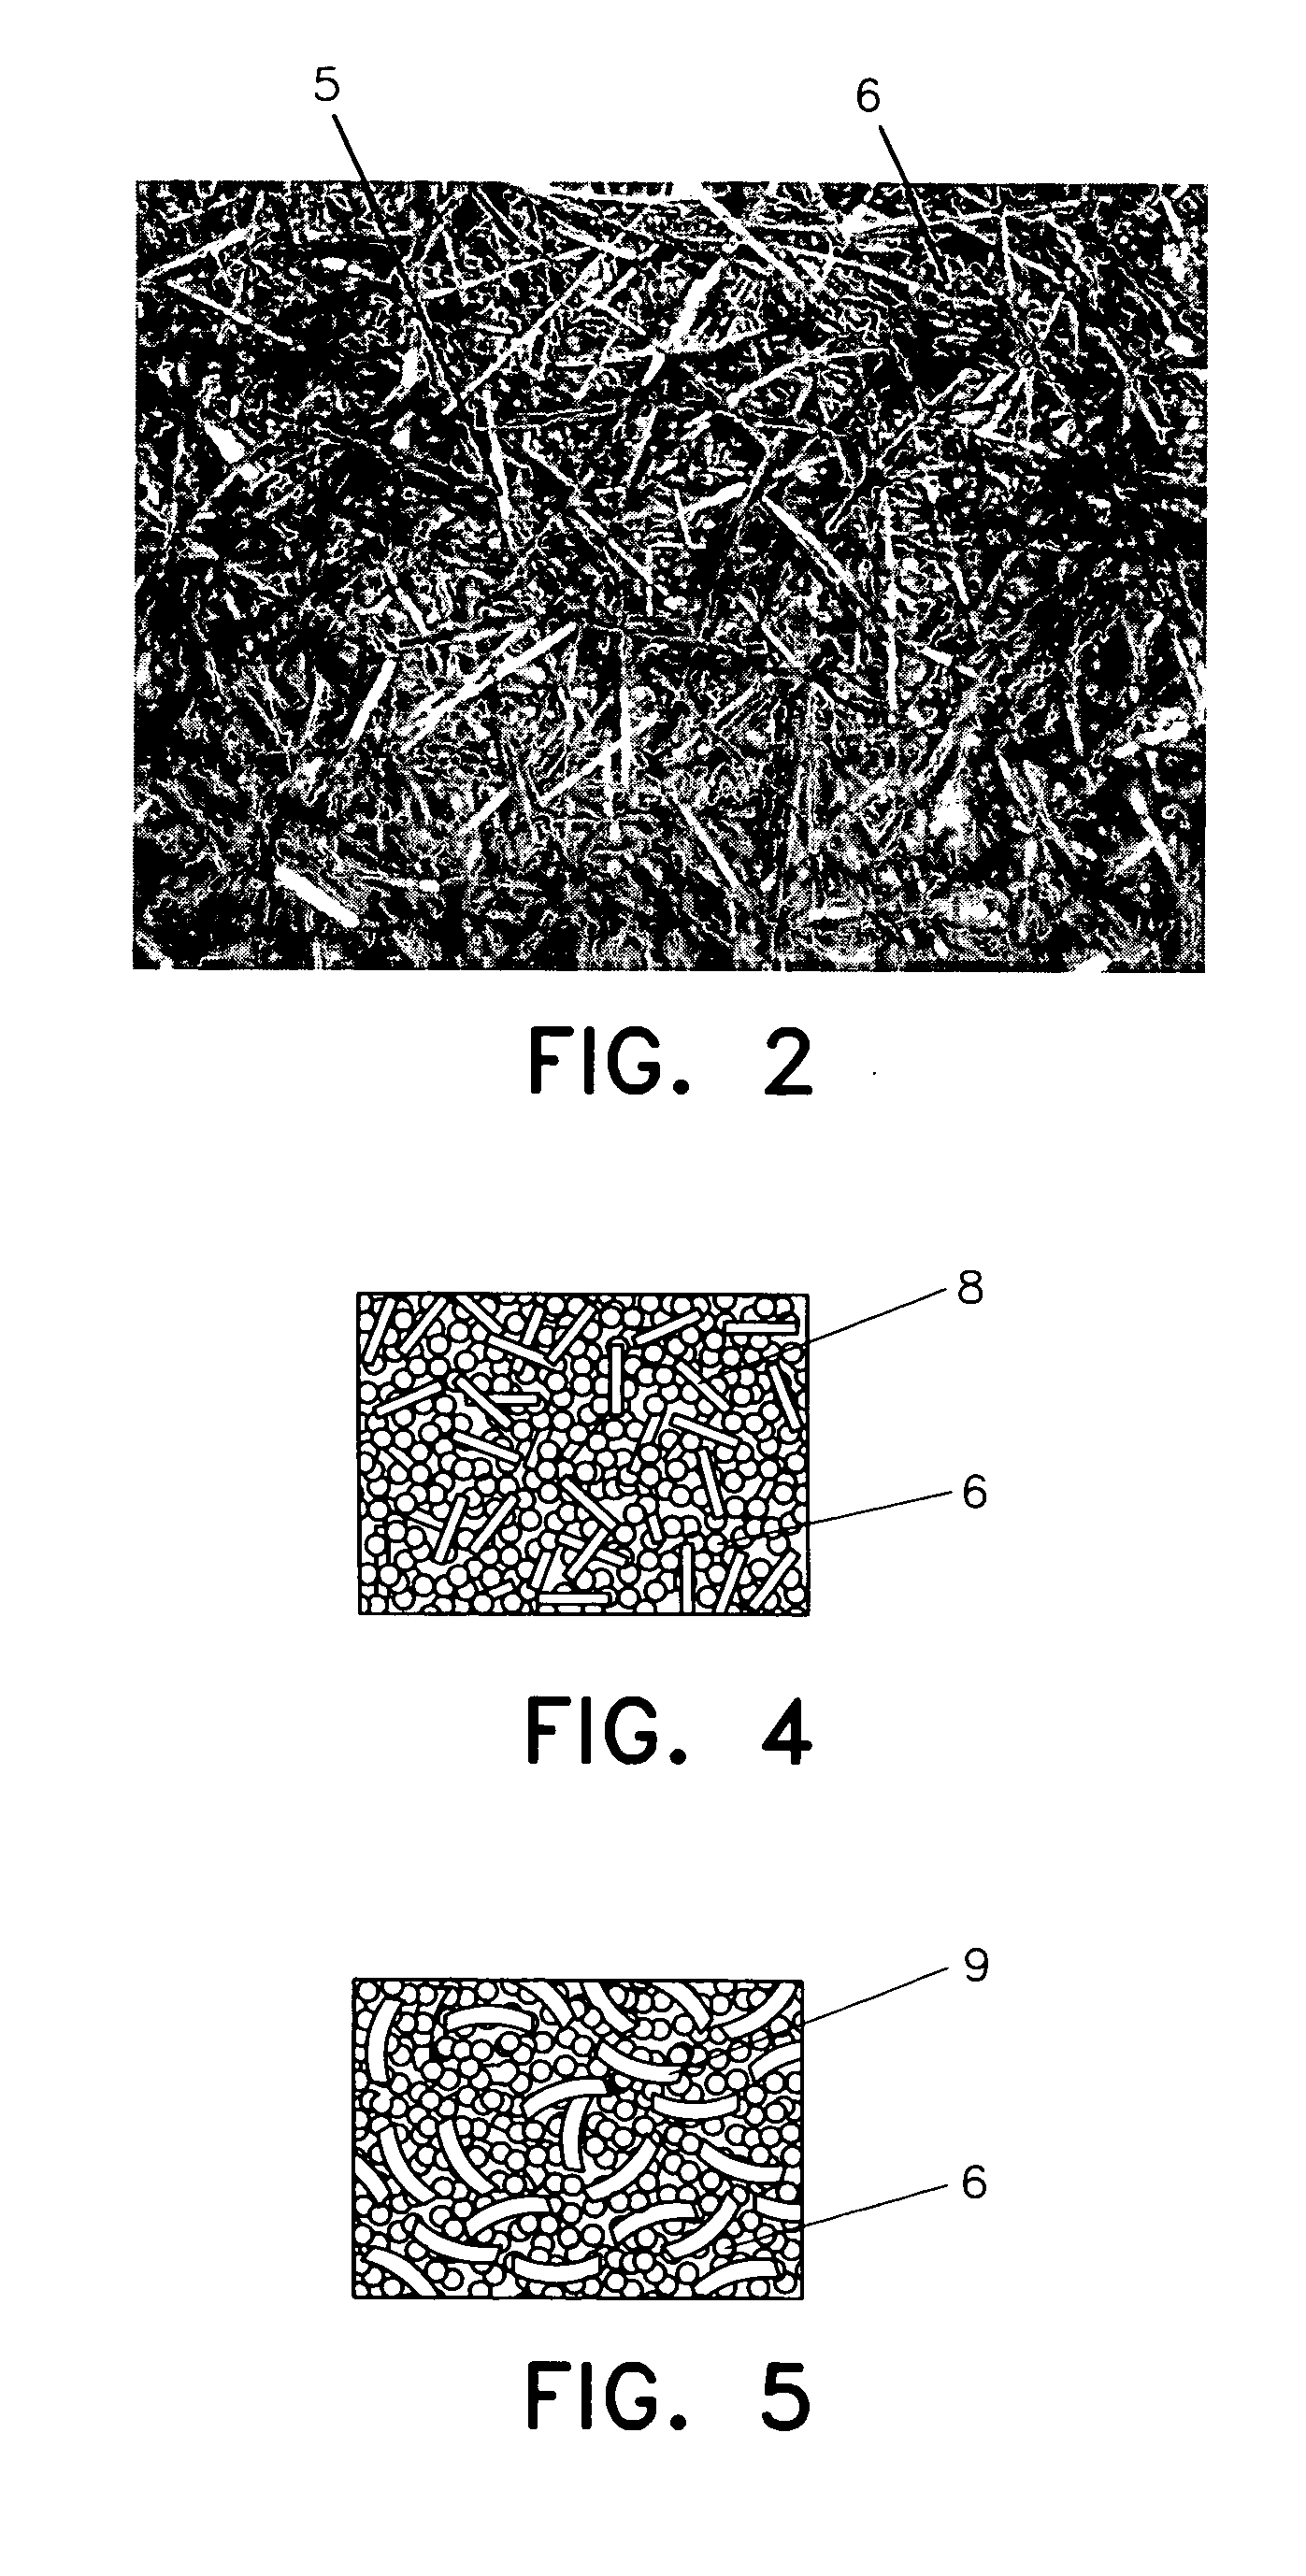 Hydrogen storage container and mixture therein